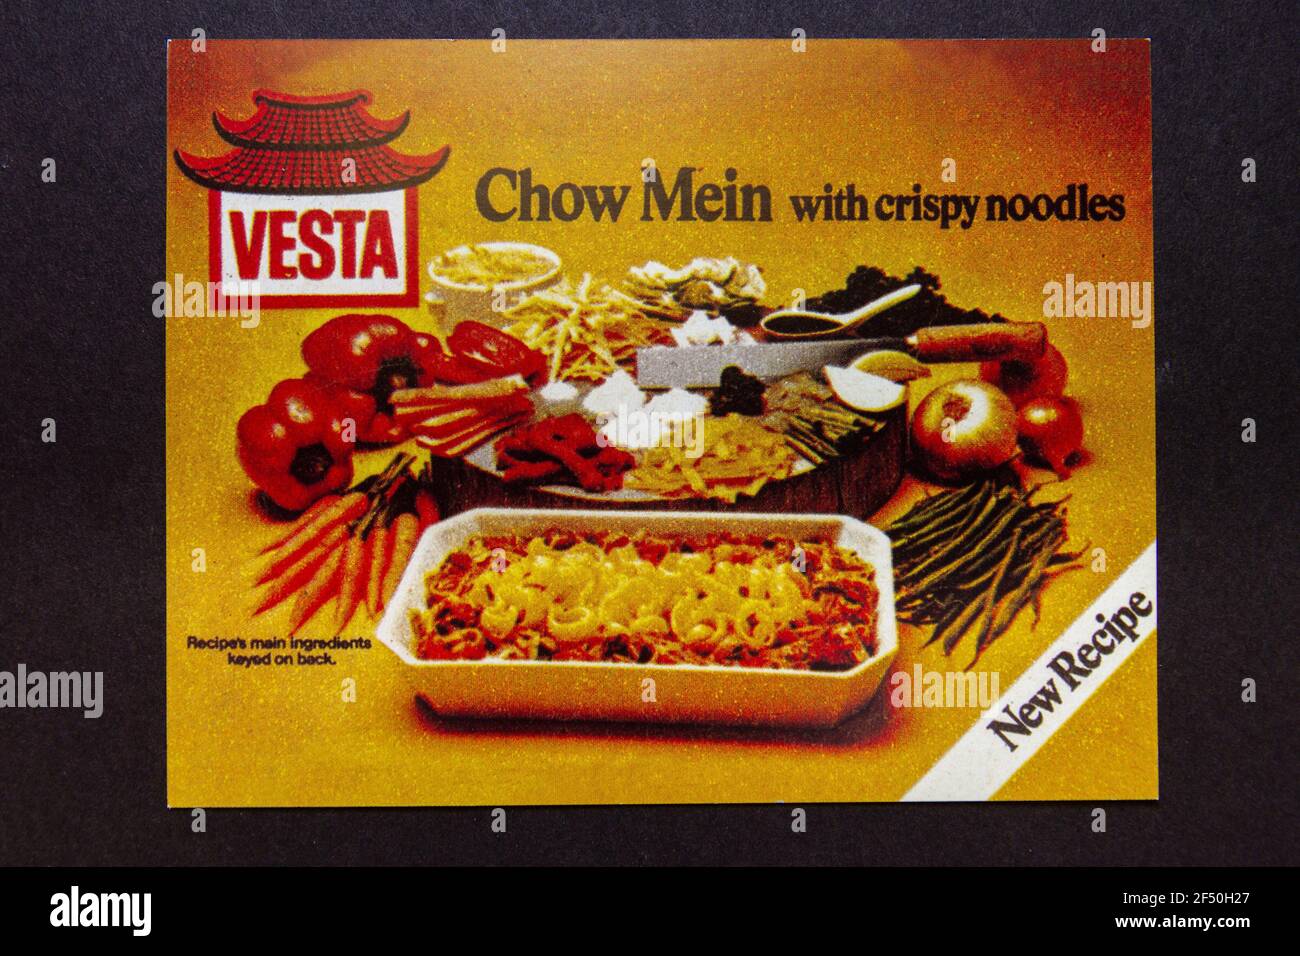 A replica advert of the Vesta Chow Mein dried food dish, part of a school 1970s Childhood memorabilia pack. Stock Photo